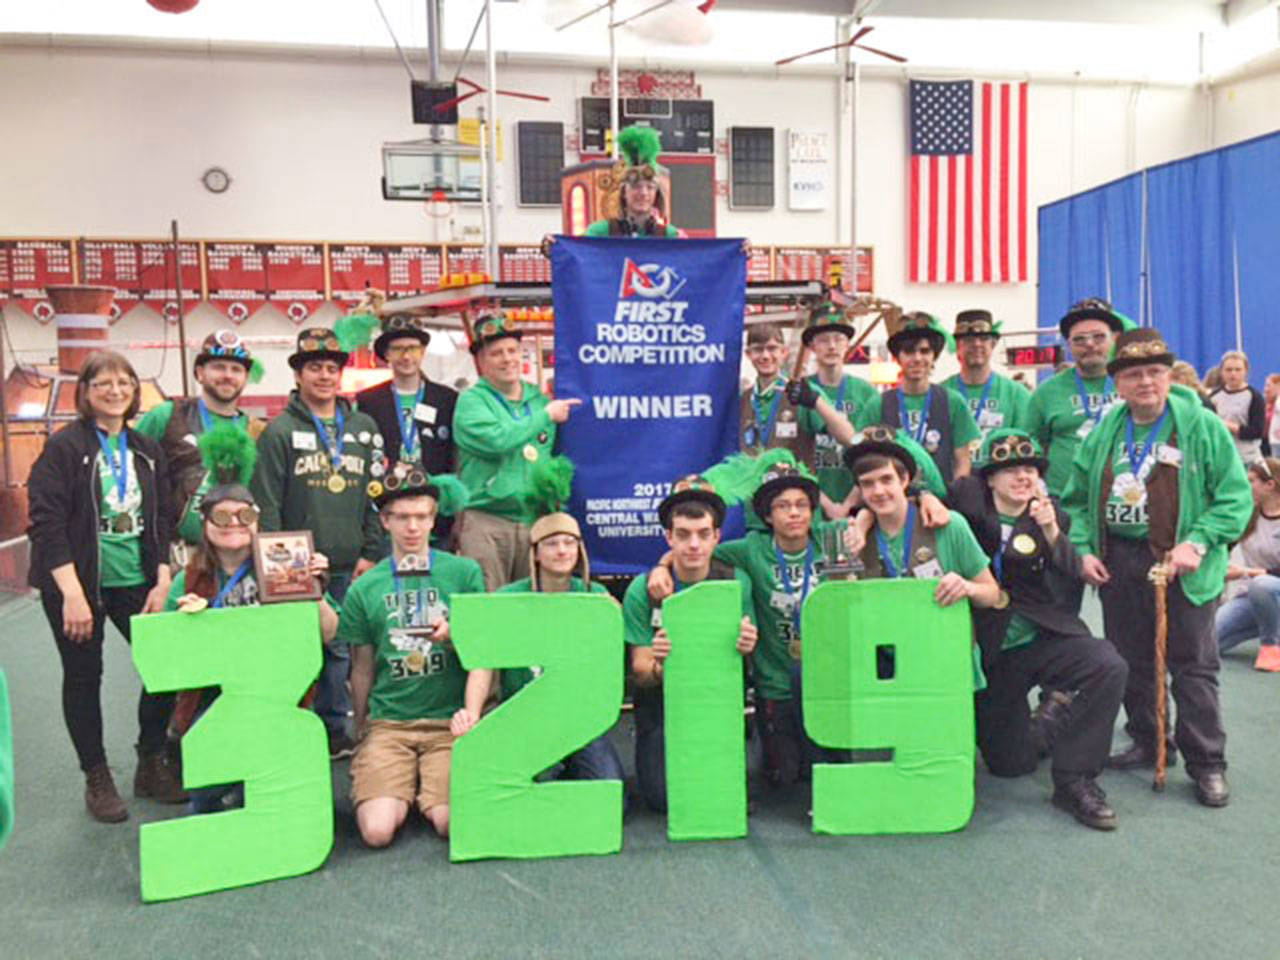 Led by team mentor Jan Eric, Auburn High School’s Trojan Robotics, Engineering and Design (TREAD) team beat the district competition. COURTESY PHOTO